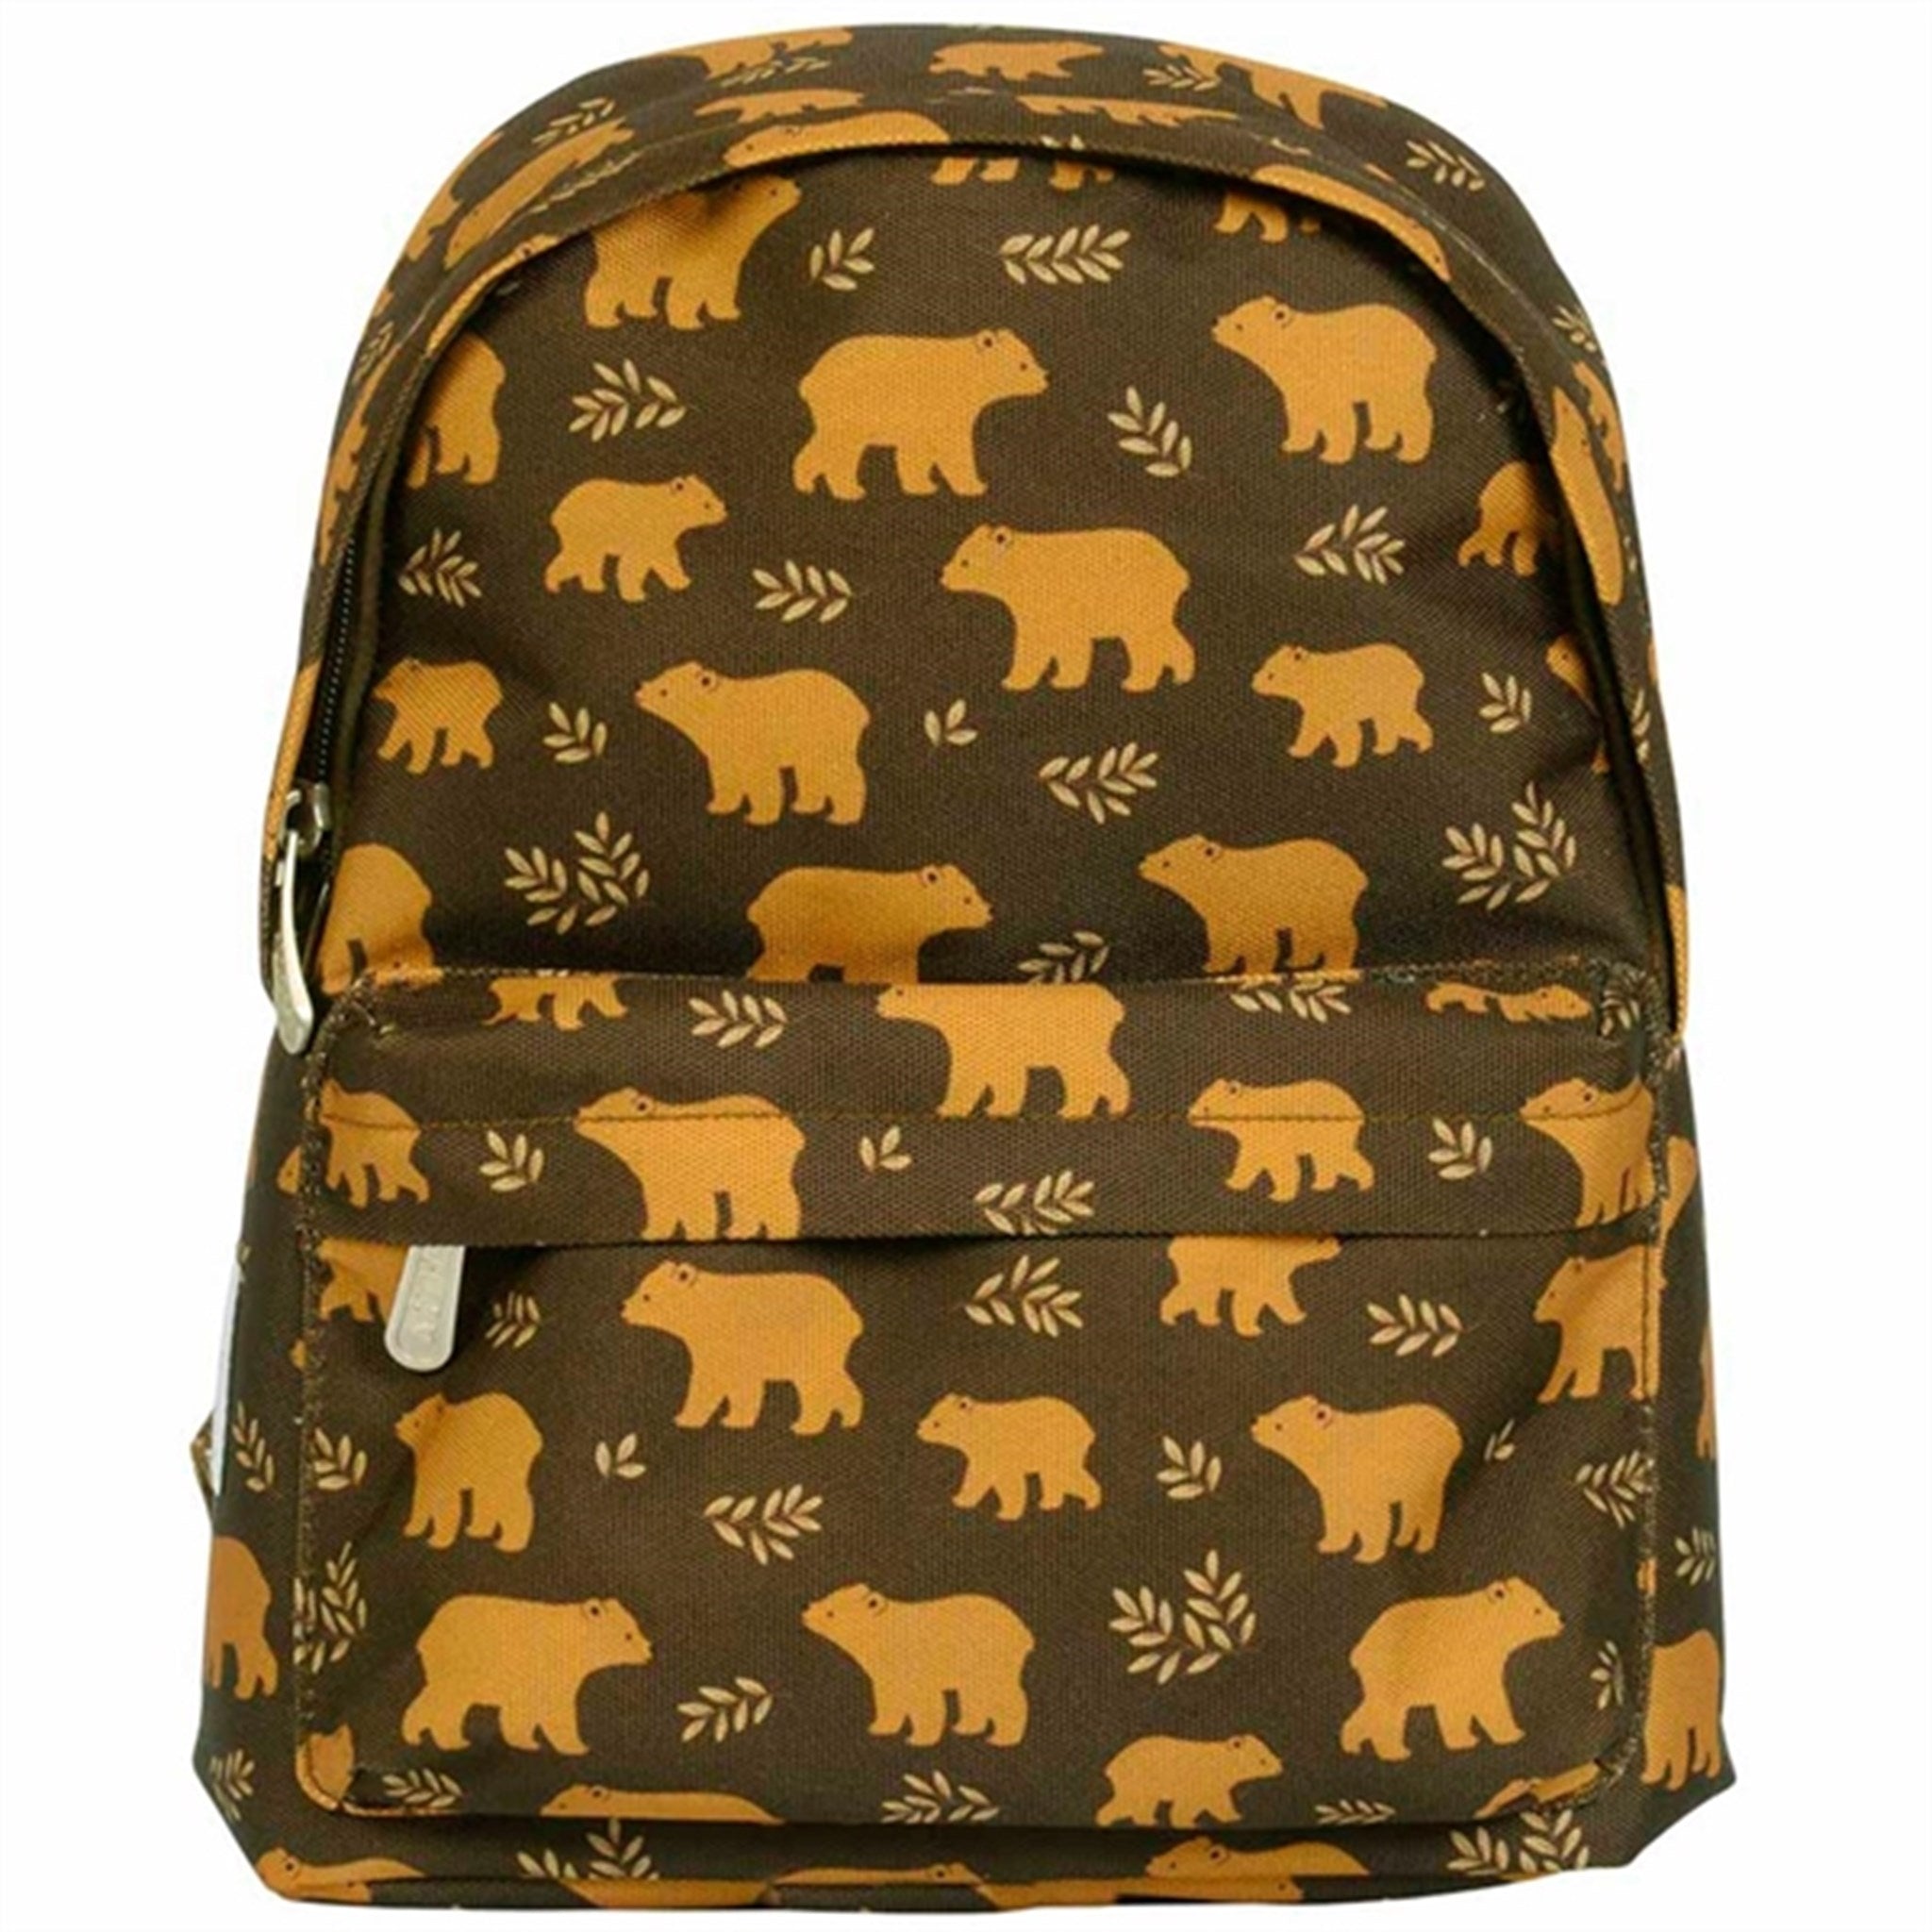 A Little Lovely Company Backpack Small Bears